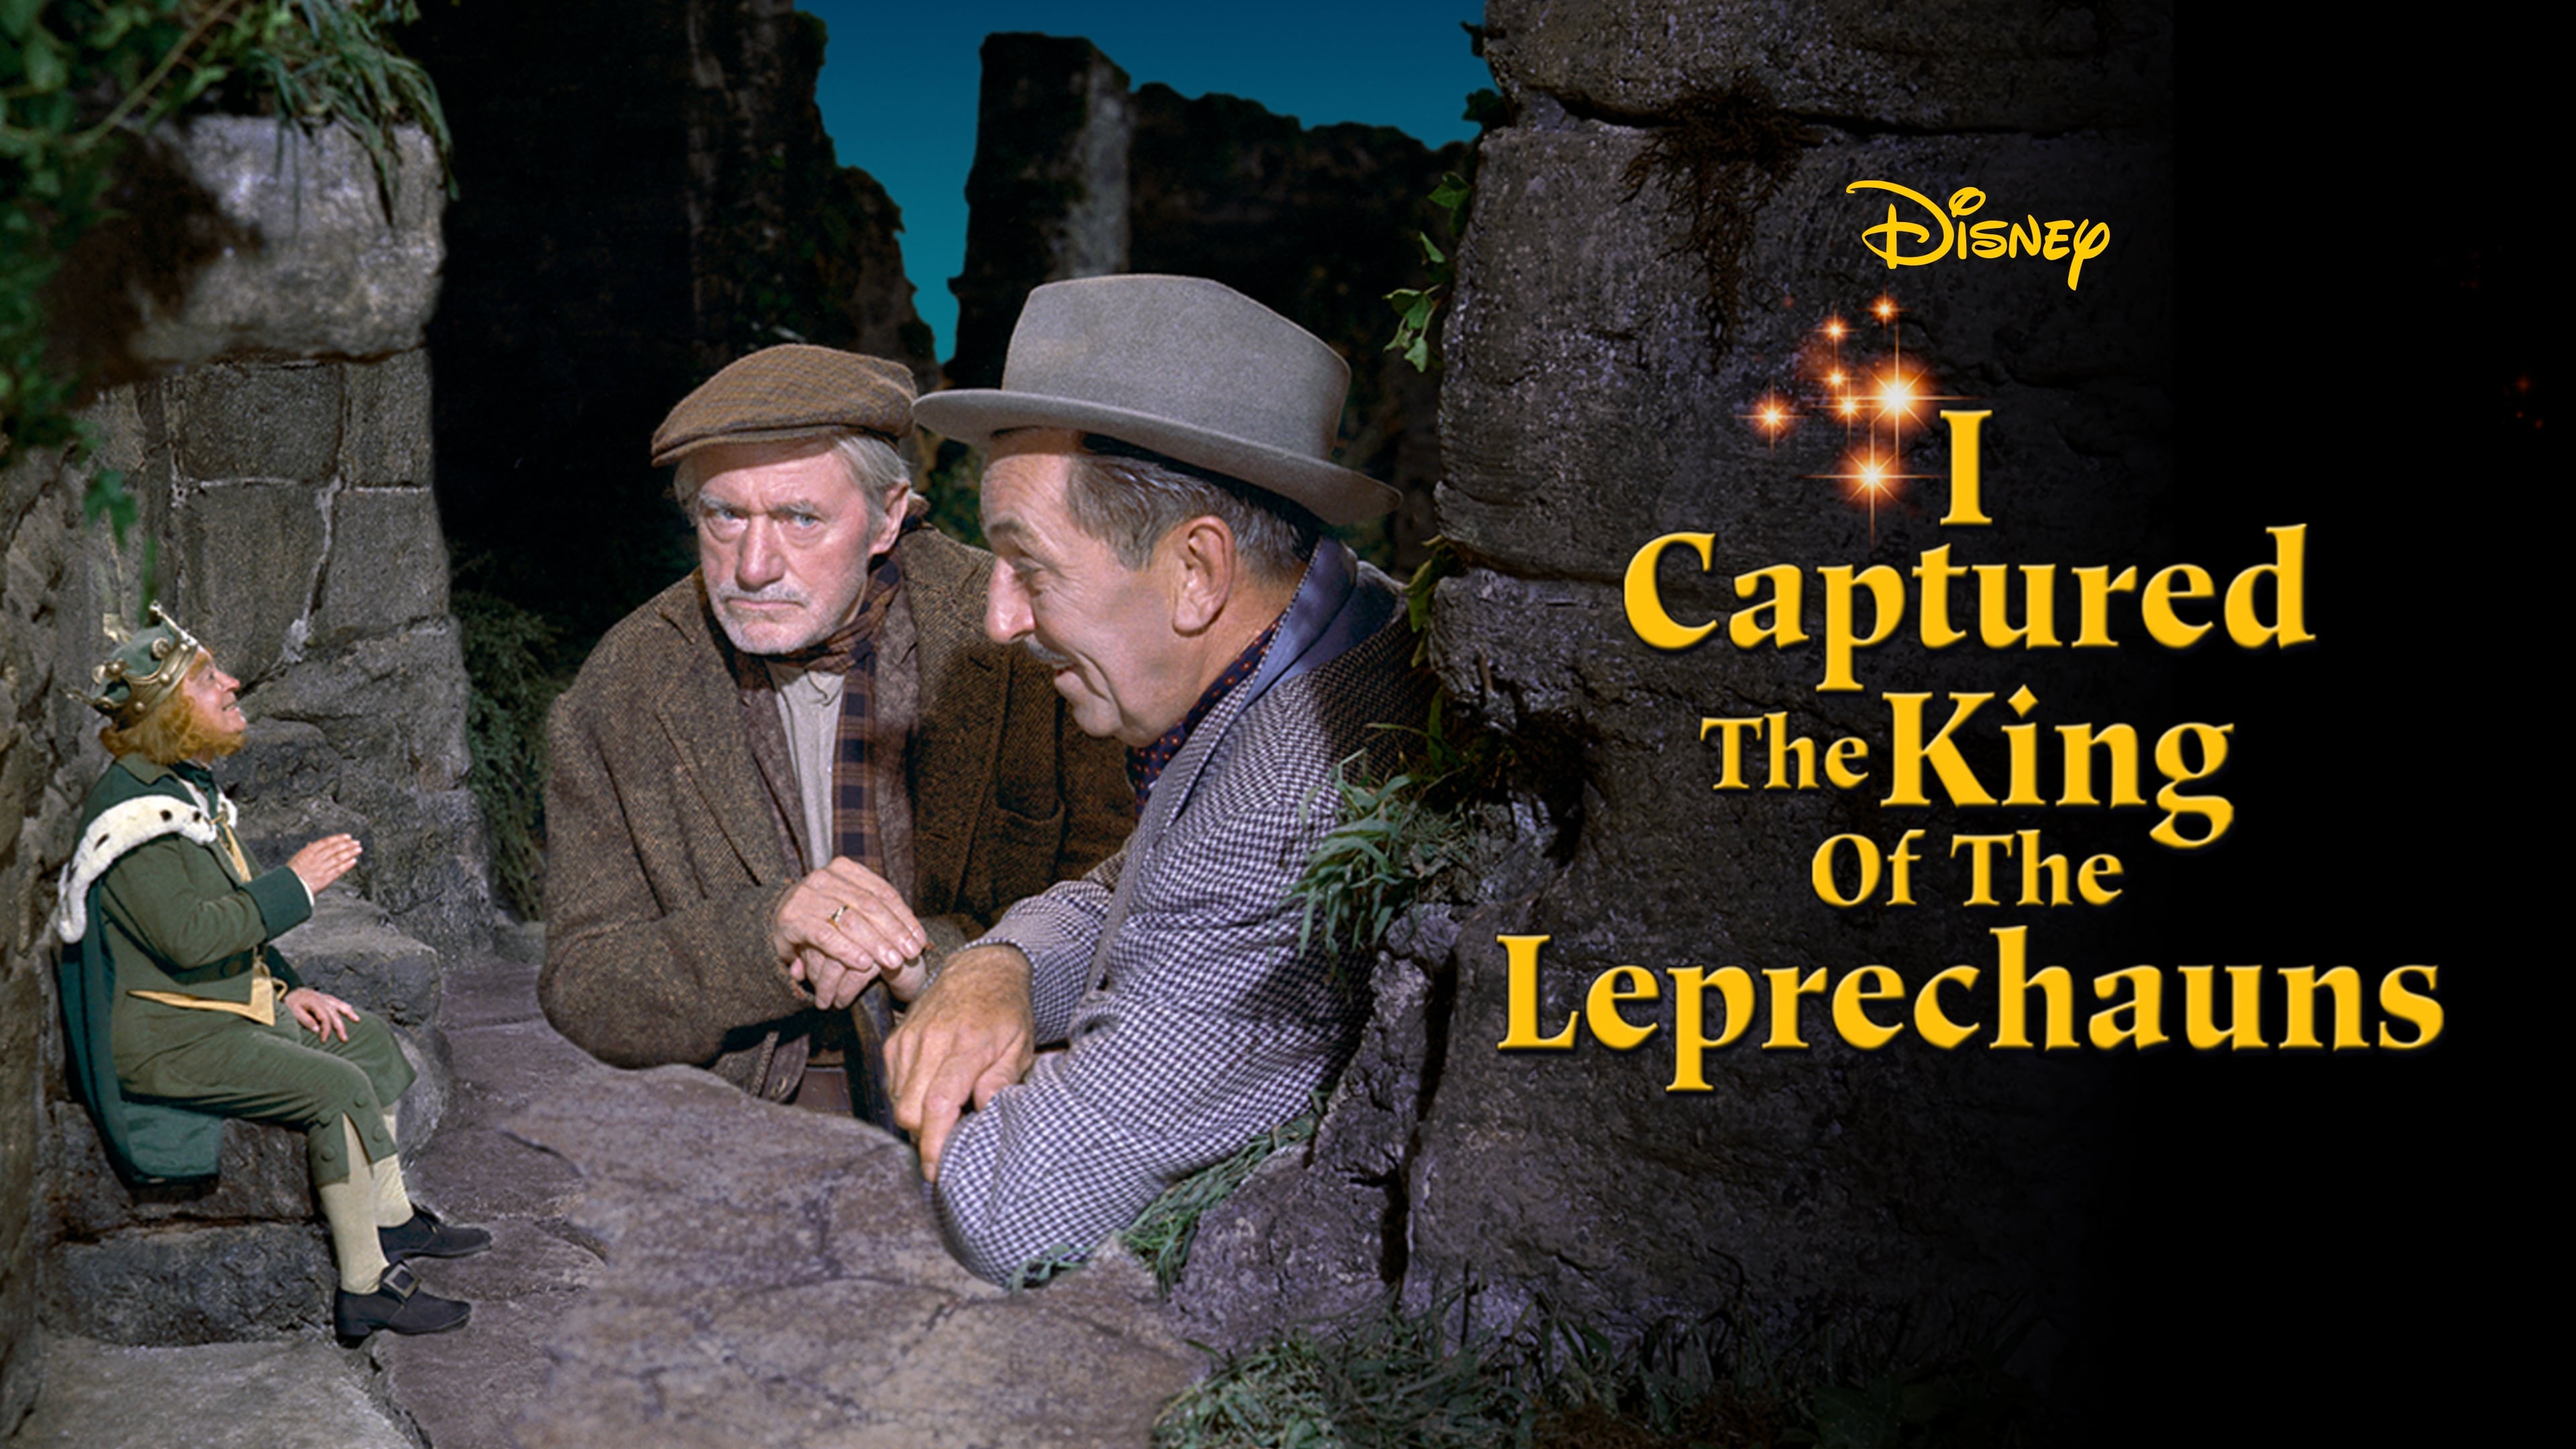 I Captured the King of the Leprechauns (1959)